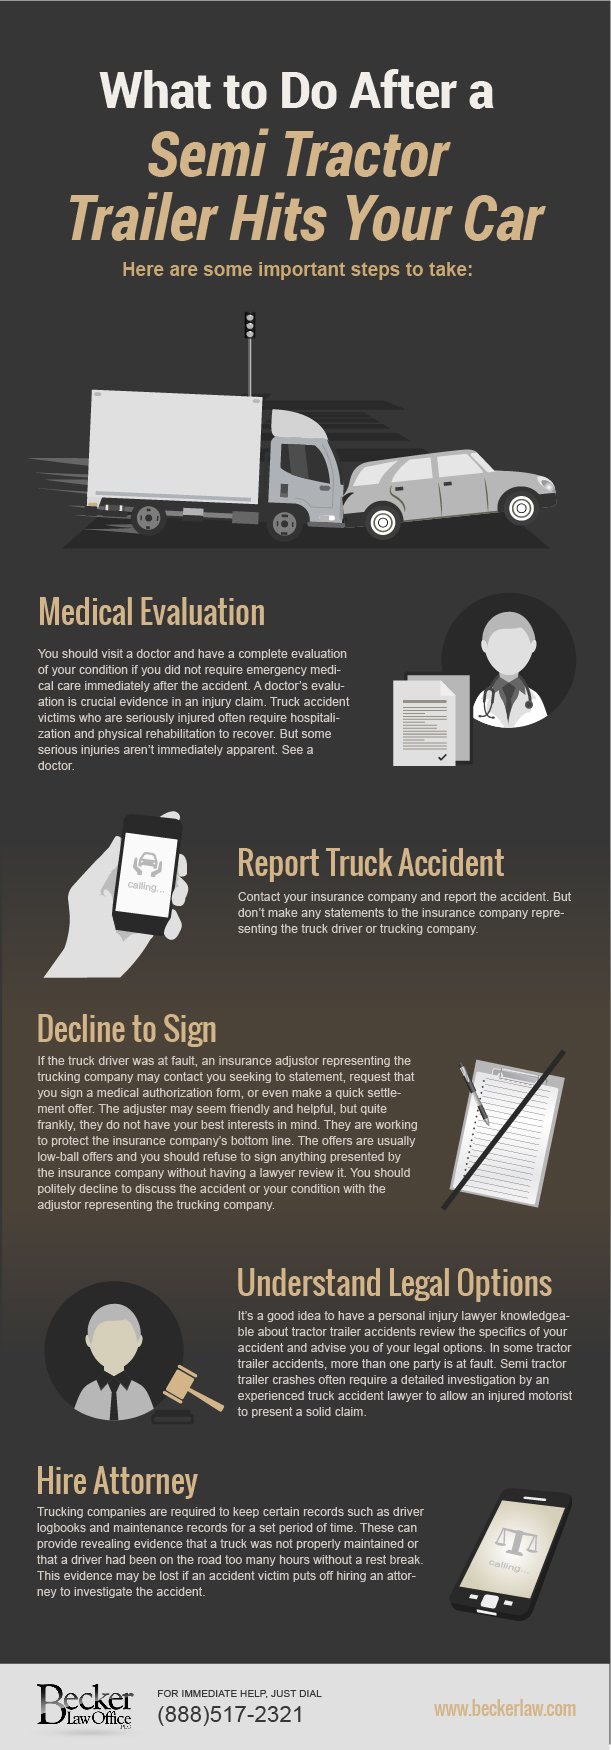 Infographic: What to do after a semi tractor trailer hits your car